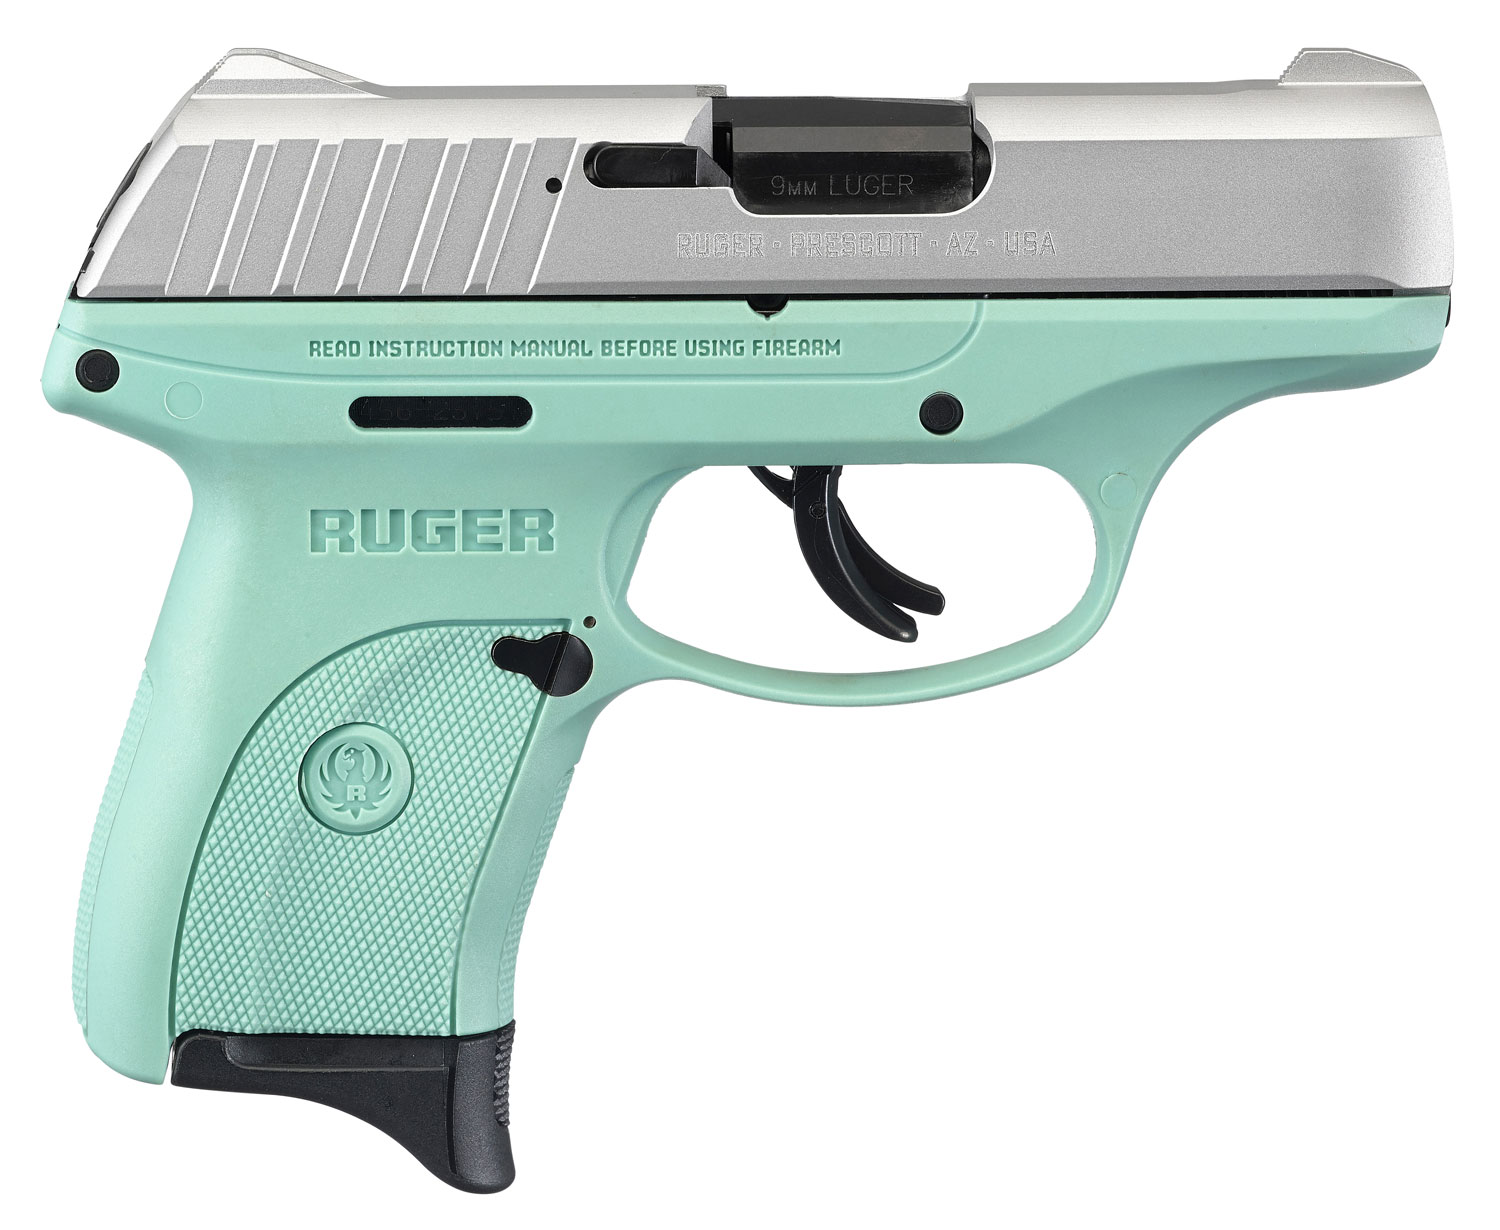 RUGER 13200 EC9S      9MM  3.12  7R   TURQUOISE